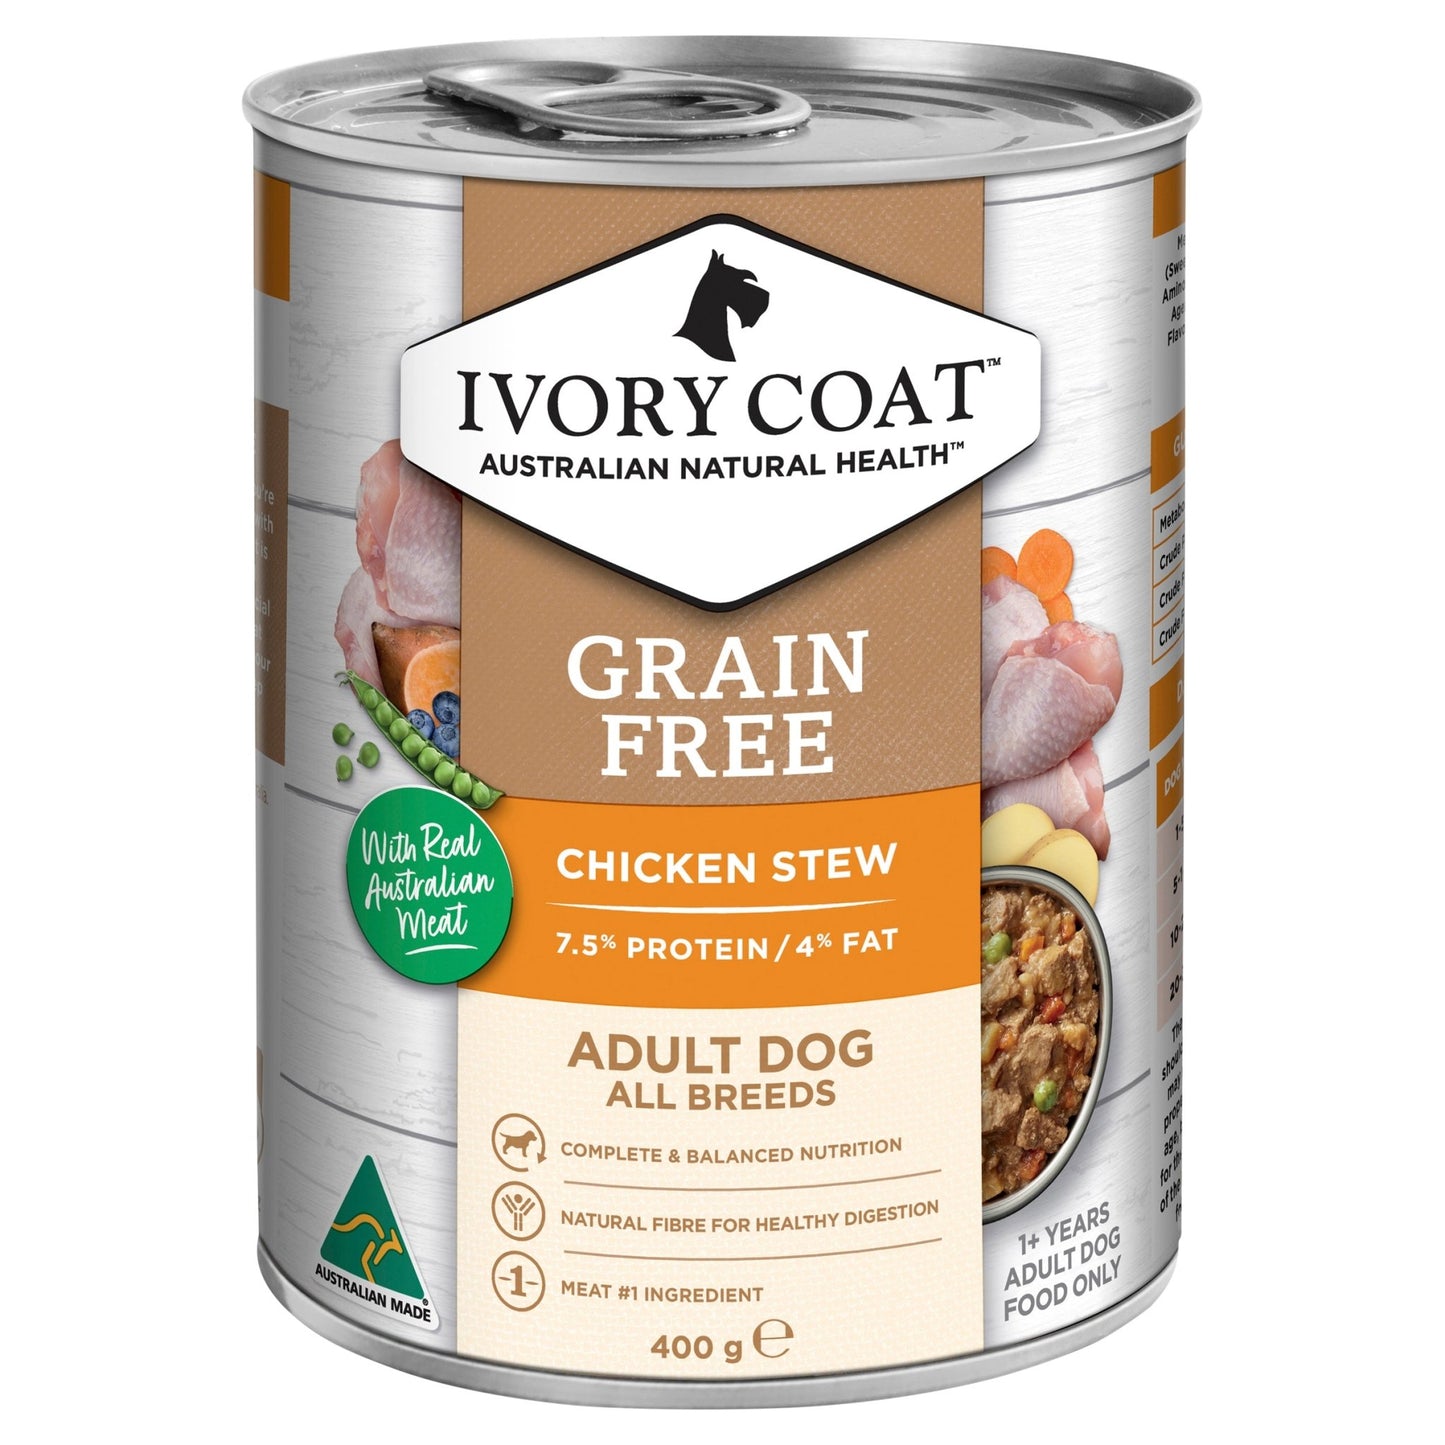 Ivory Coat Grain Free Wet Dog Food Chicken Stew 12x400g Cans - Woonona Petfood & Produce